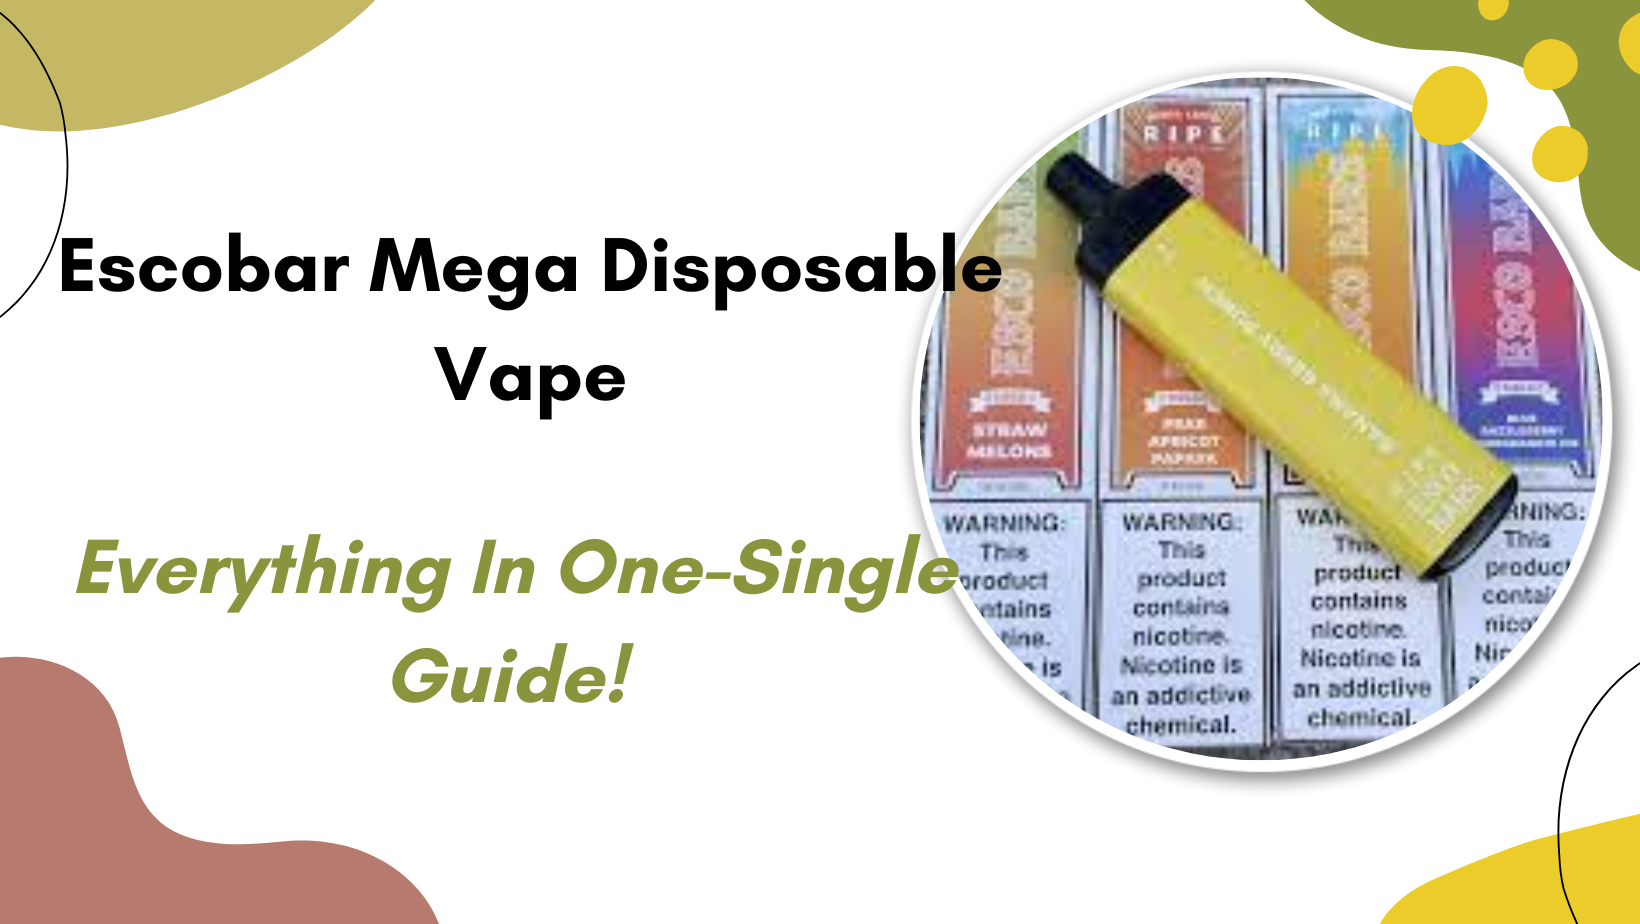 Escobar Mega Disposable Vape; Everything In One-Single Guide!